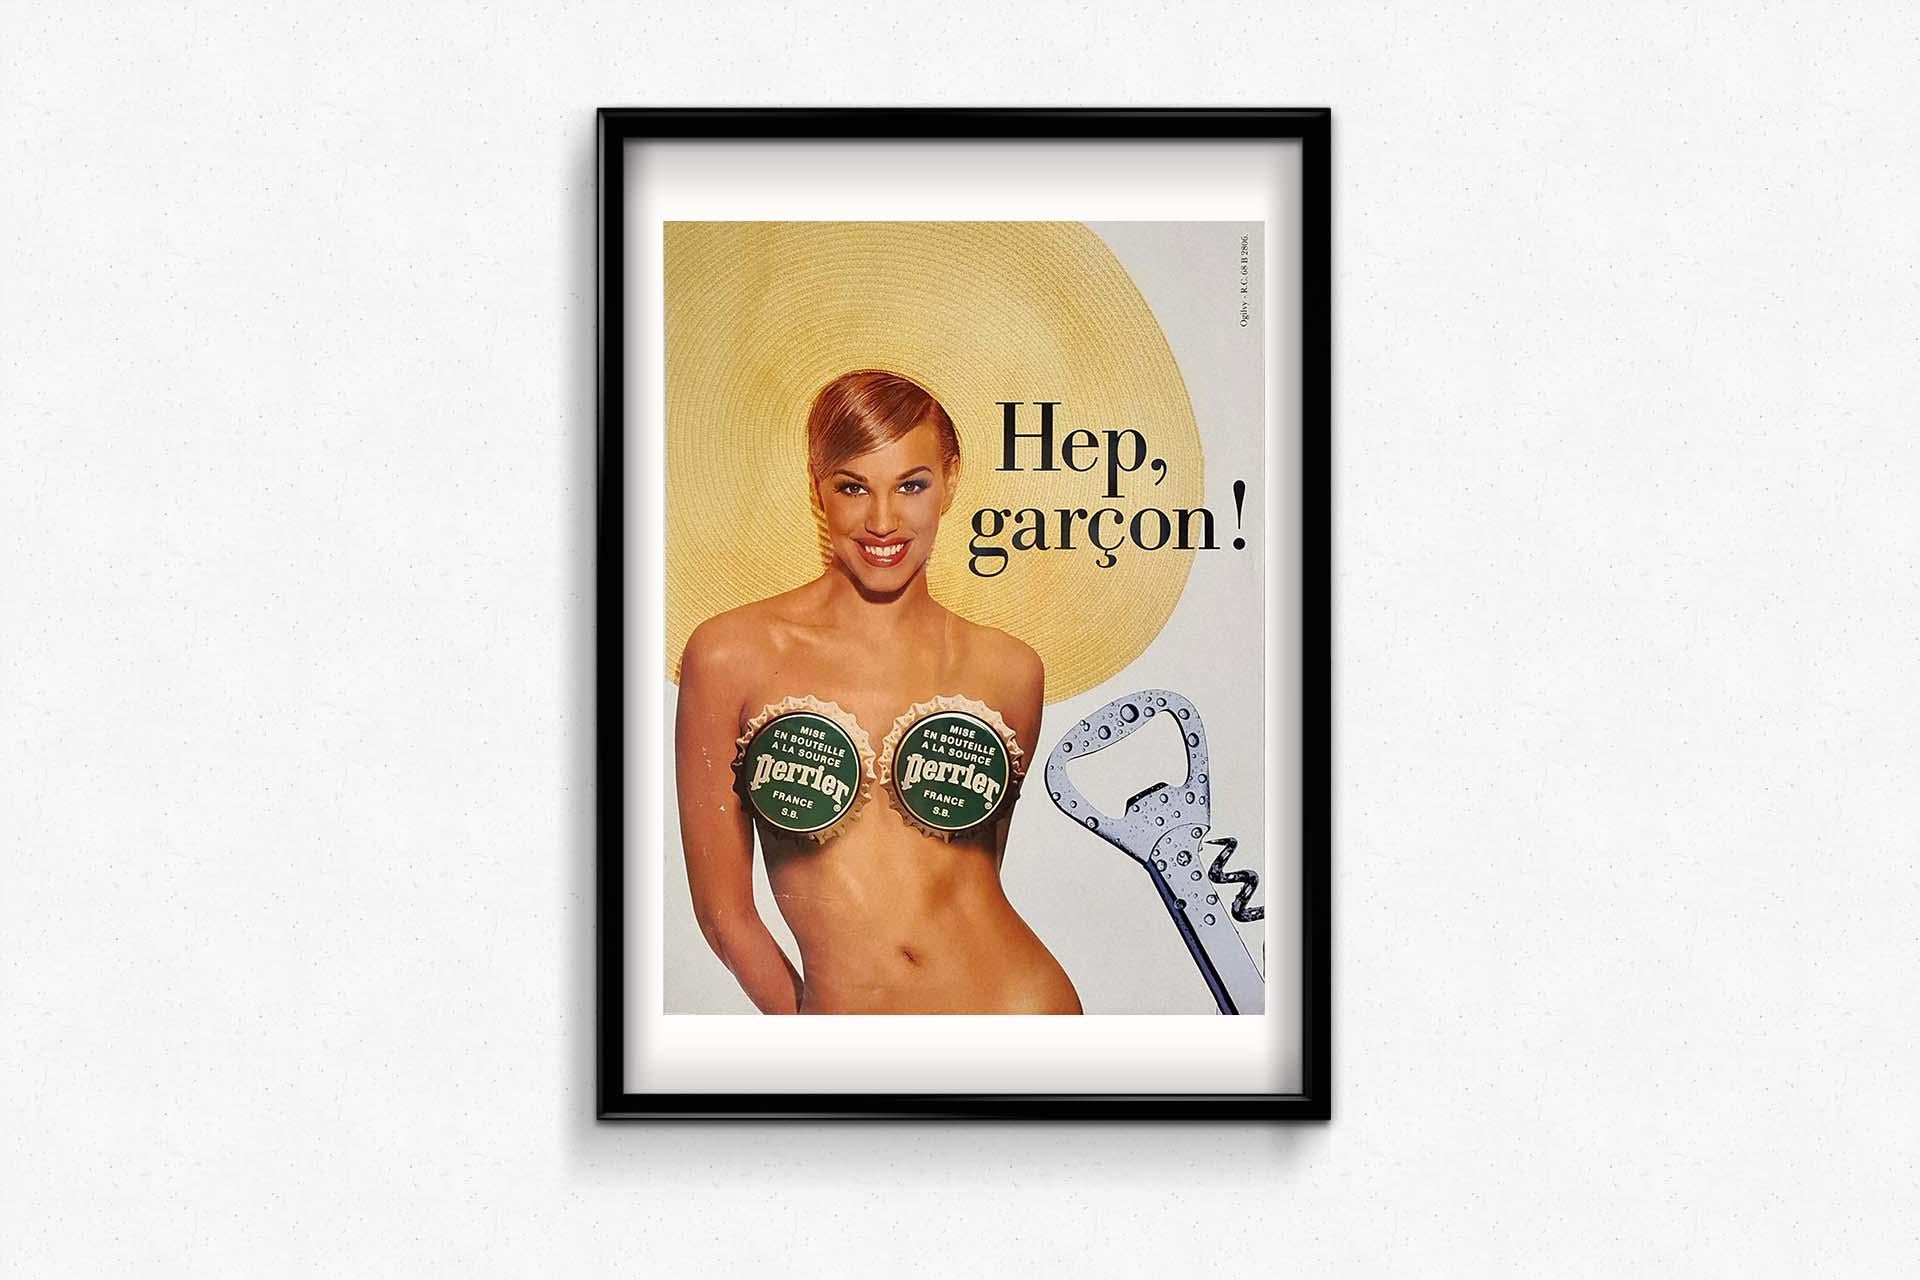 Hep, Garçon!
The provocative ad produced by Ogilvy in 1992, Hep, Garçon! embodies the funny and carefree liberation associated with the sea, sex and sun theme of the 1960s.
Impeccable but plural, the PERRIER brand chose the modern muse of the 30s